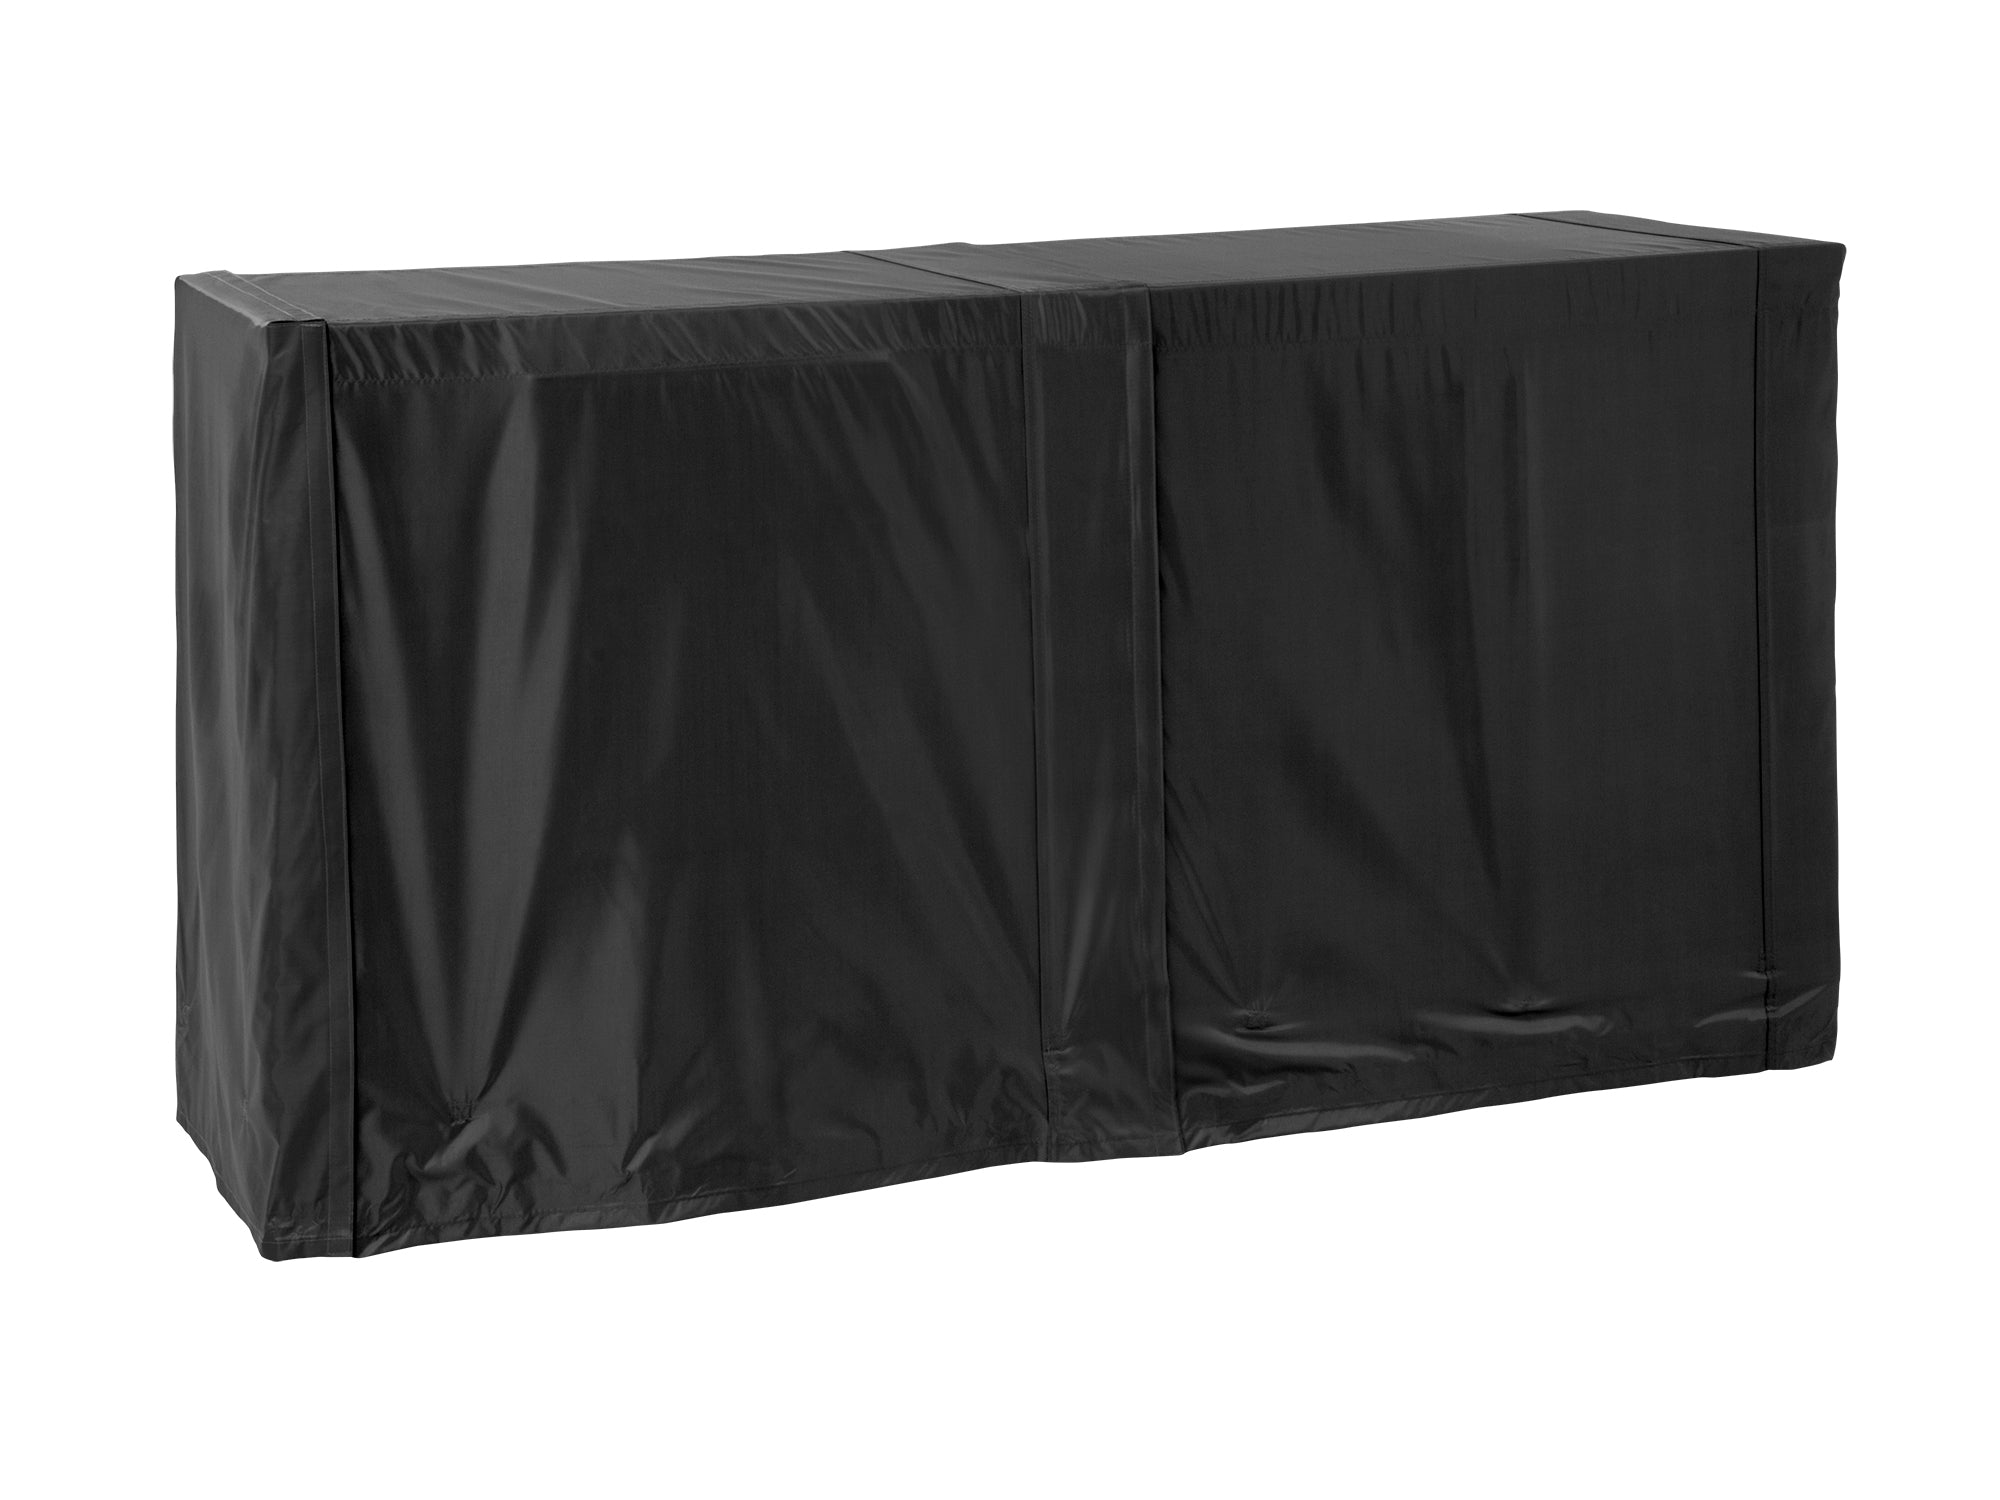 Outdoor Kitchen All-Season Cover Bundle: 64 in. Cover, Right/Left Side Panel Covers